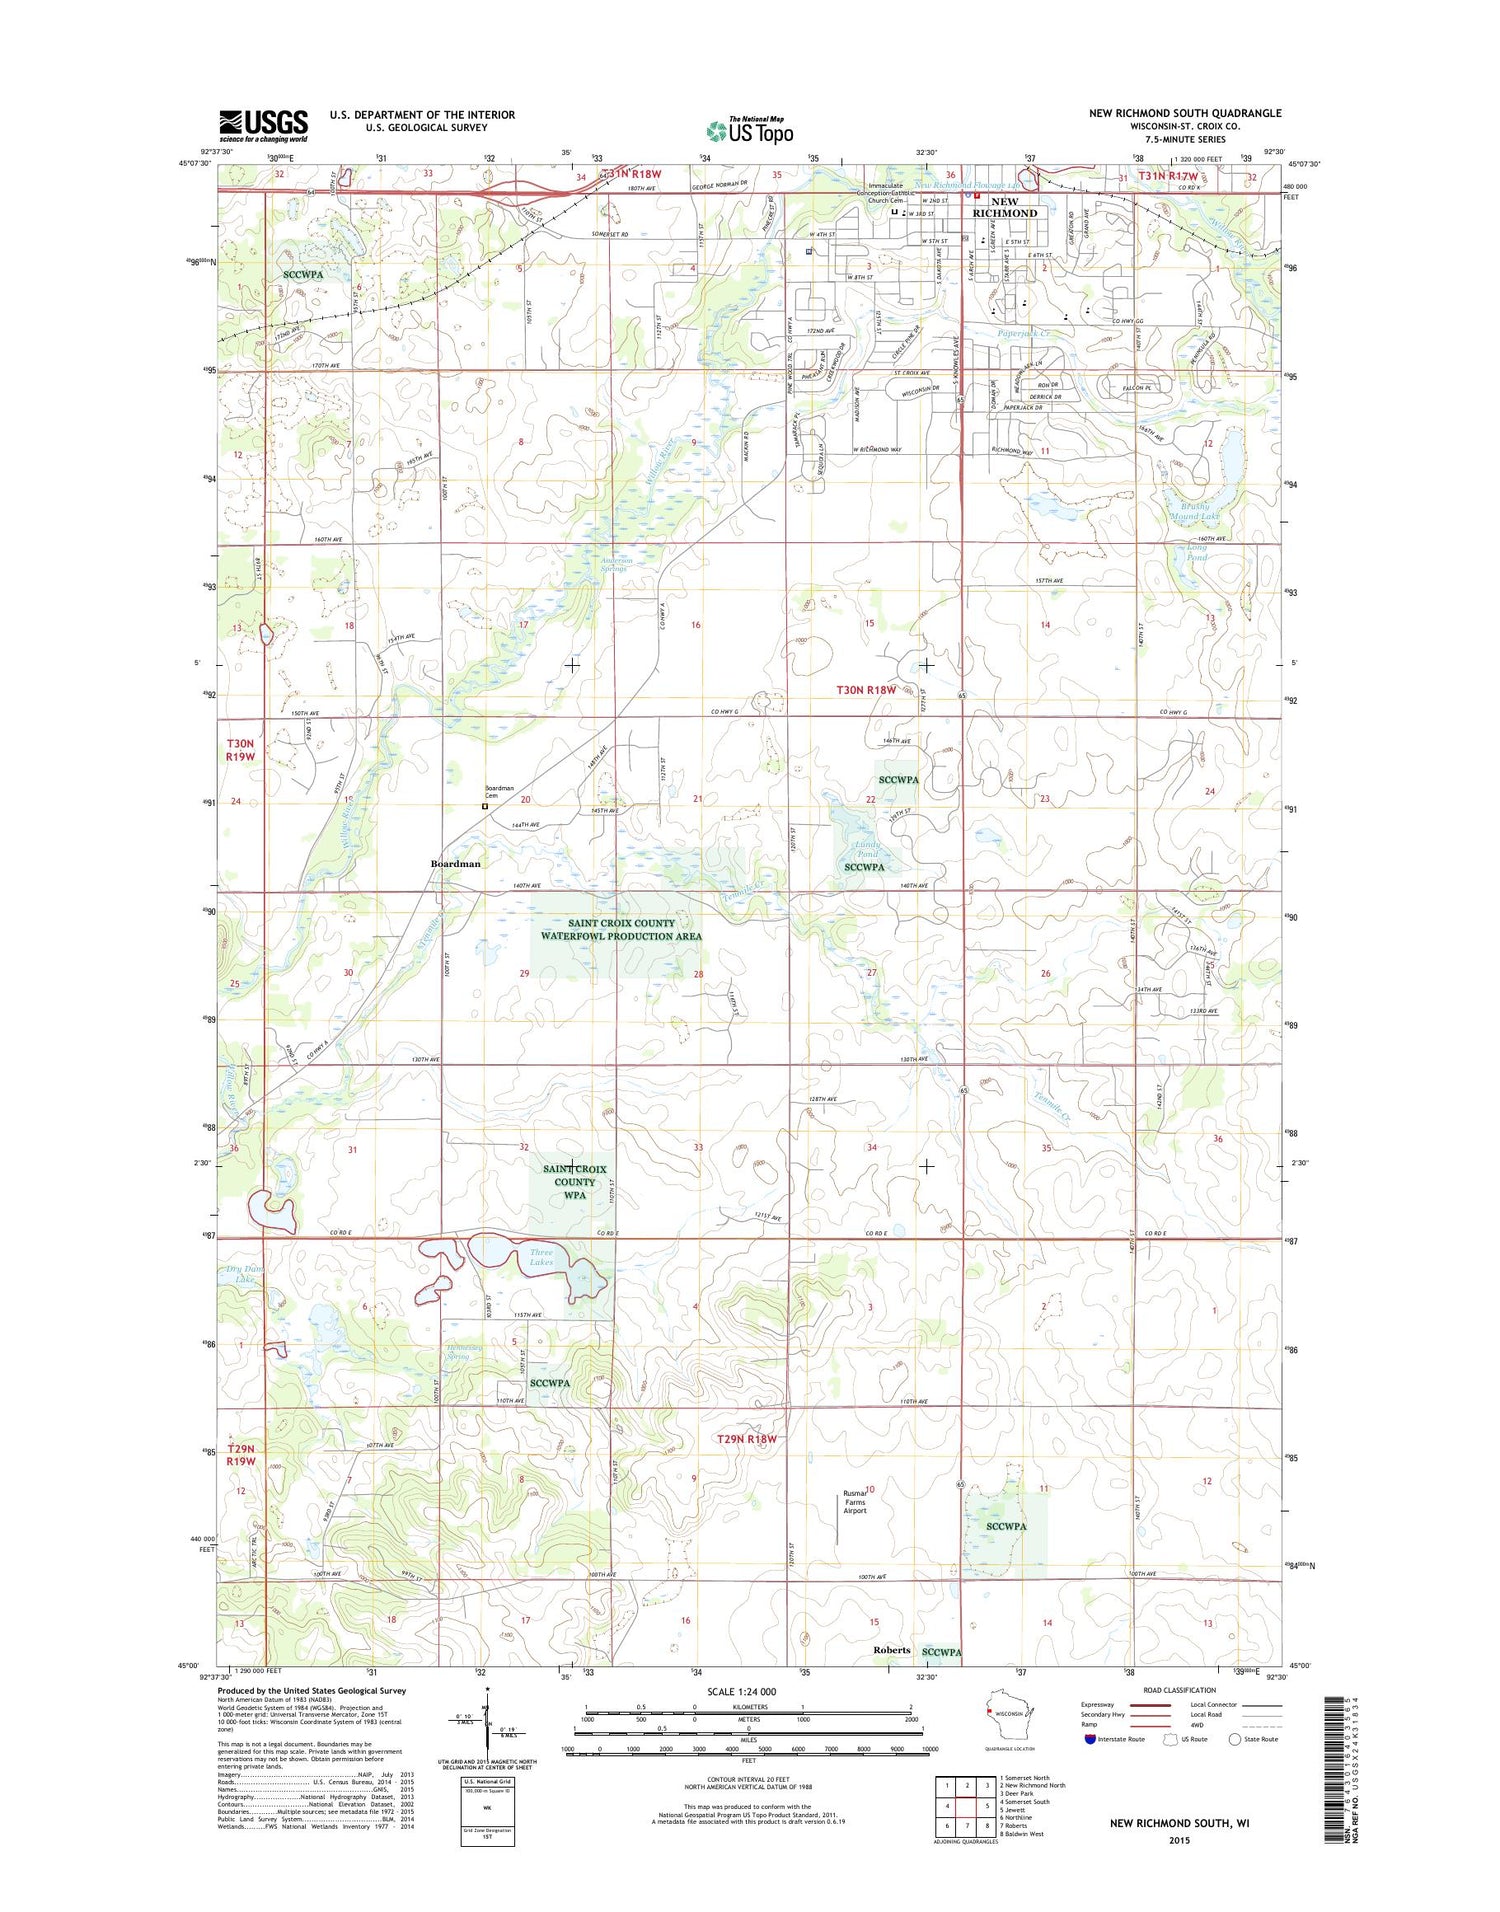 New Richmond South Wisconsin US Topo Map Image